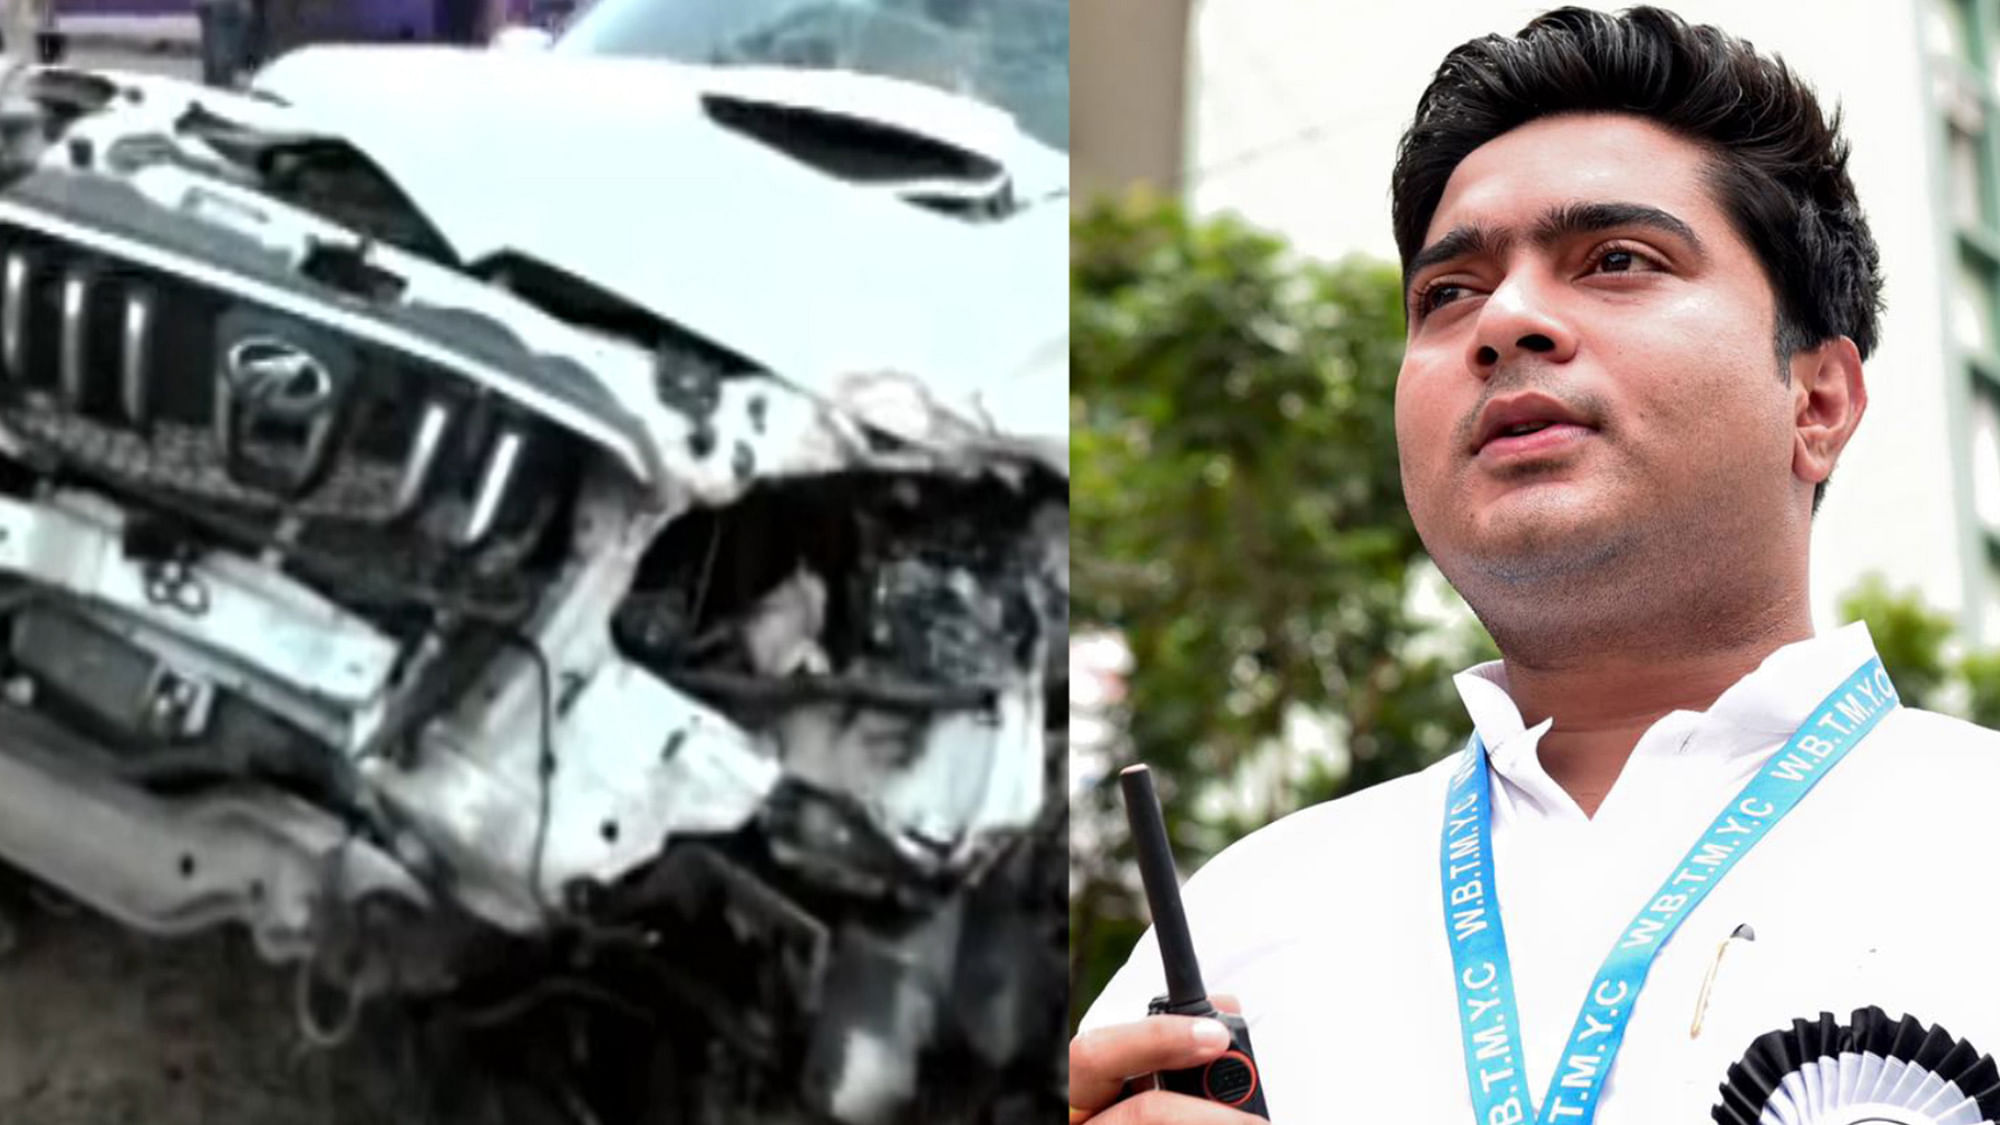 Abhishek Banerjee was travelling to Murshidabad when his car hit a truck near Singur on Tuesday. (Photo altered by <b>The Quint</b>)